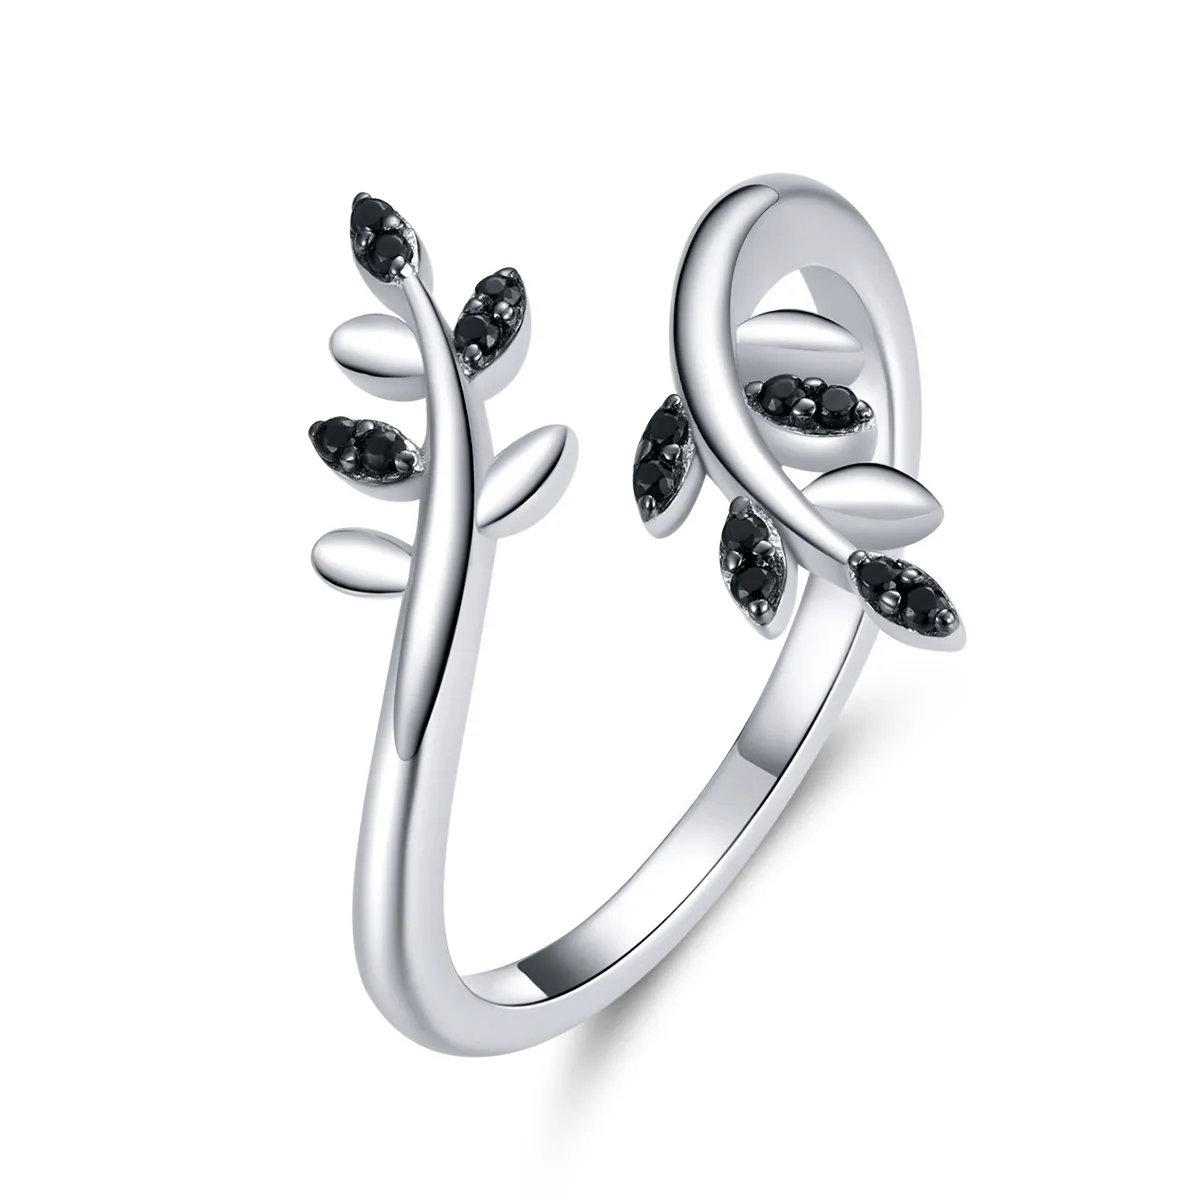 Pandora Style Silver Tree Branch Open Ring - BSR129